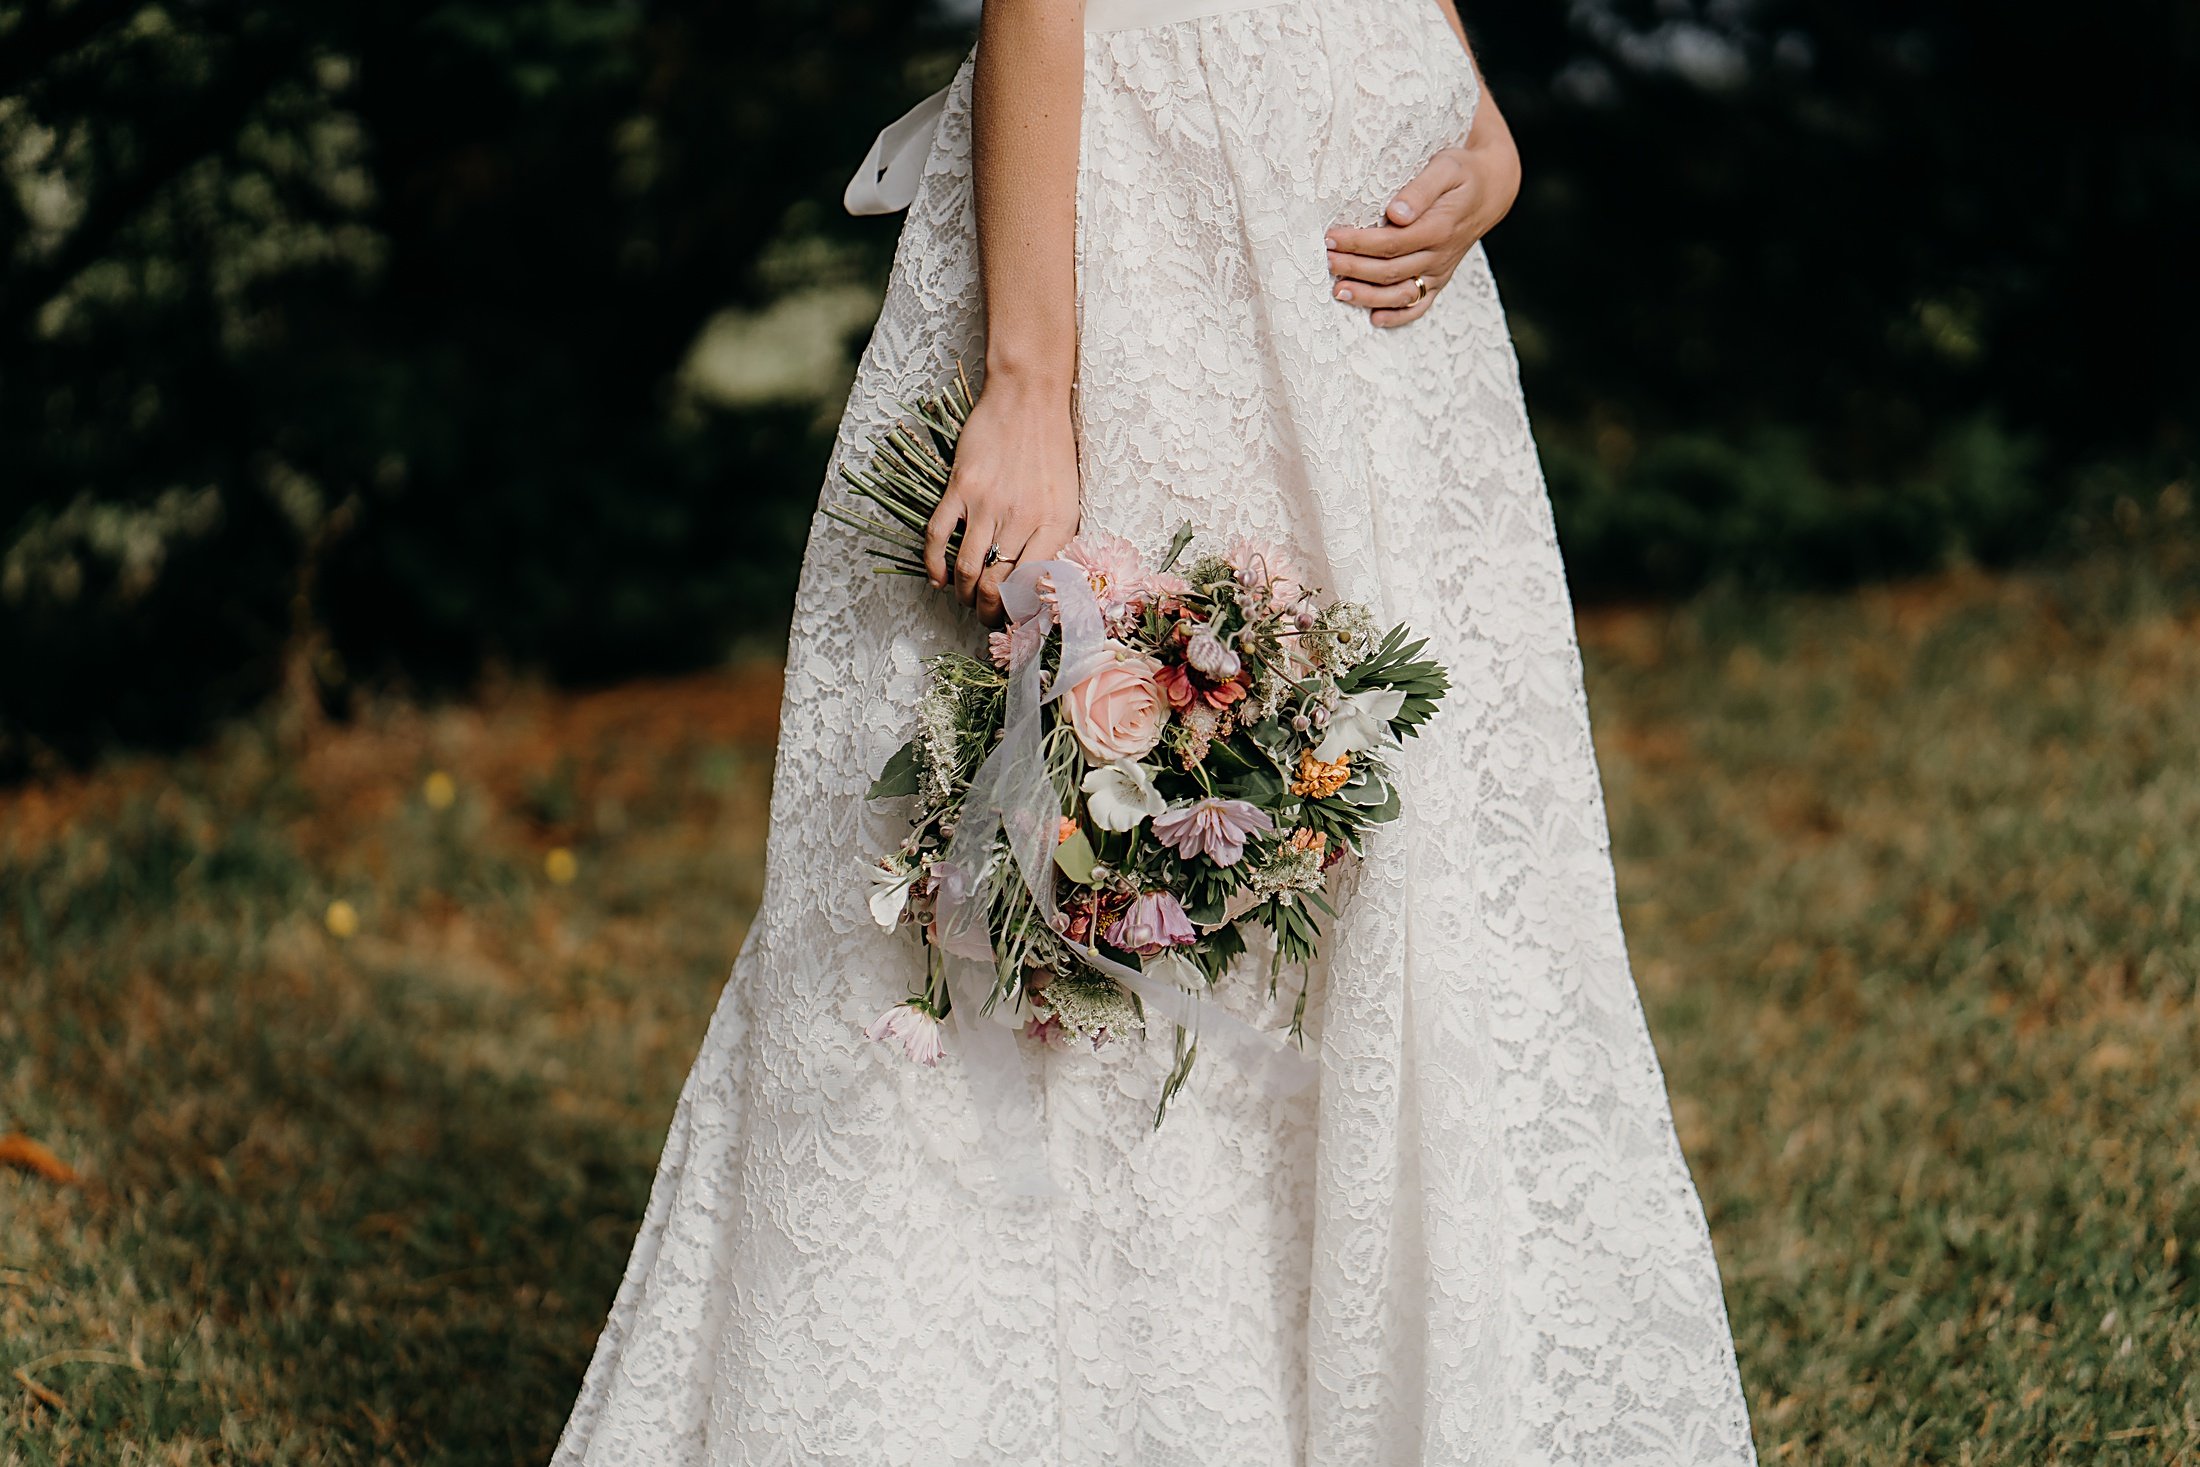 Daisy by Katie Yeung Wedding Dress, baby bump & bouquet